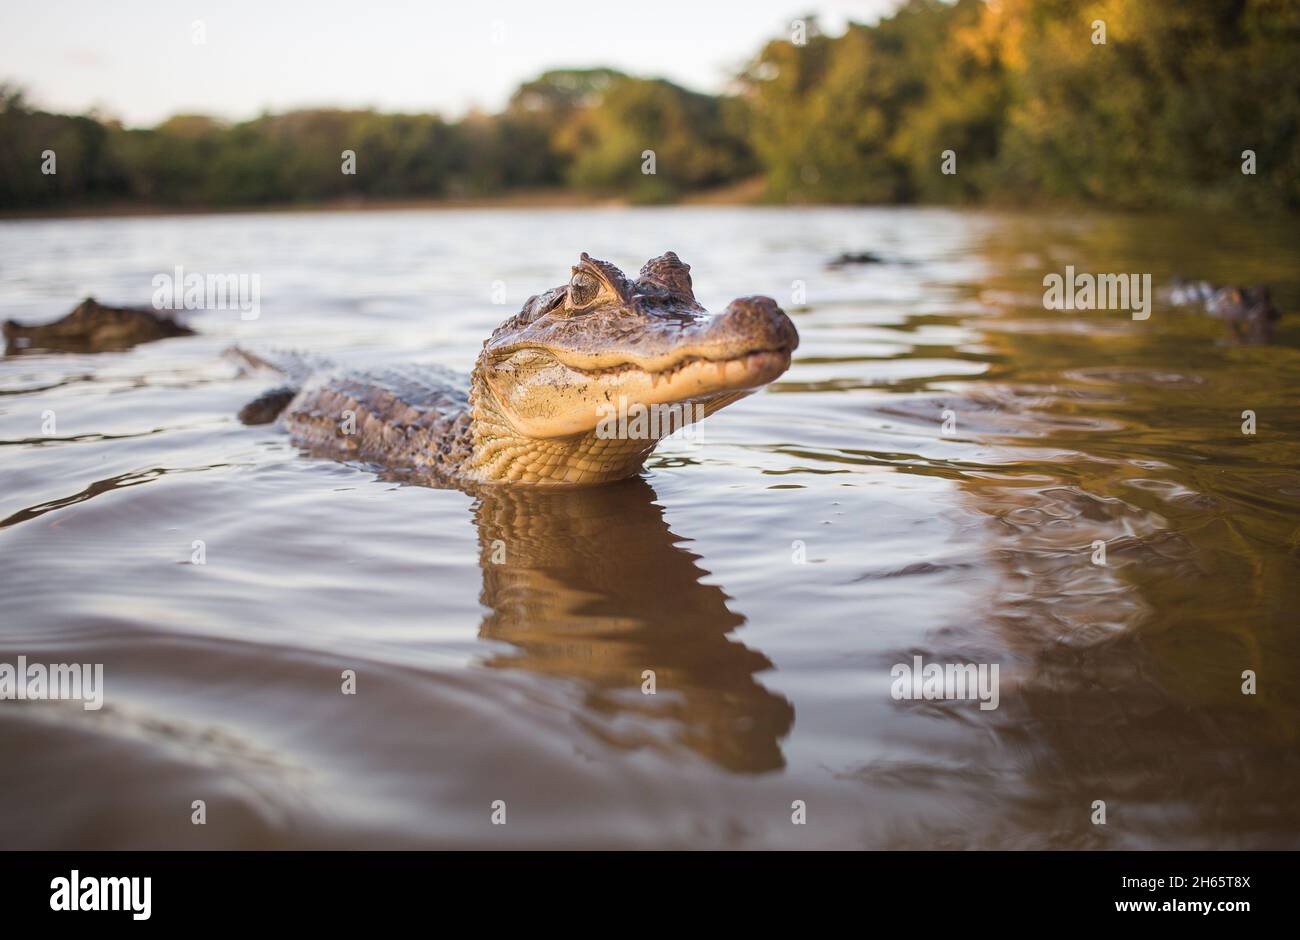 Cute small alligator smiles for camera while in water Stock Photo